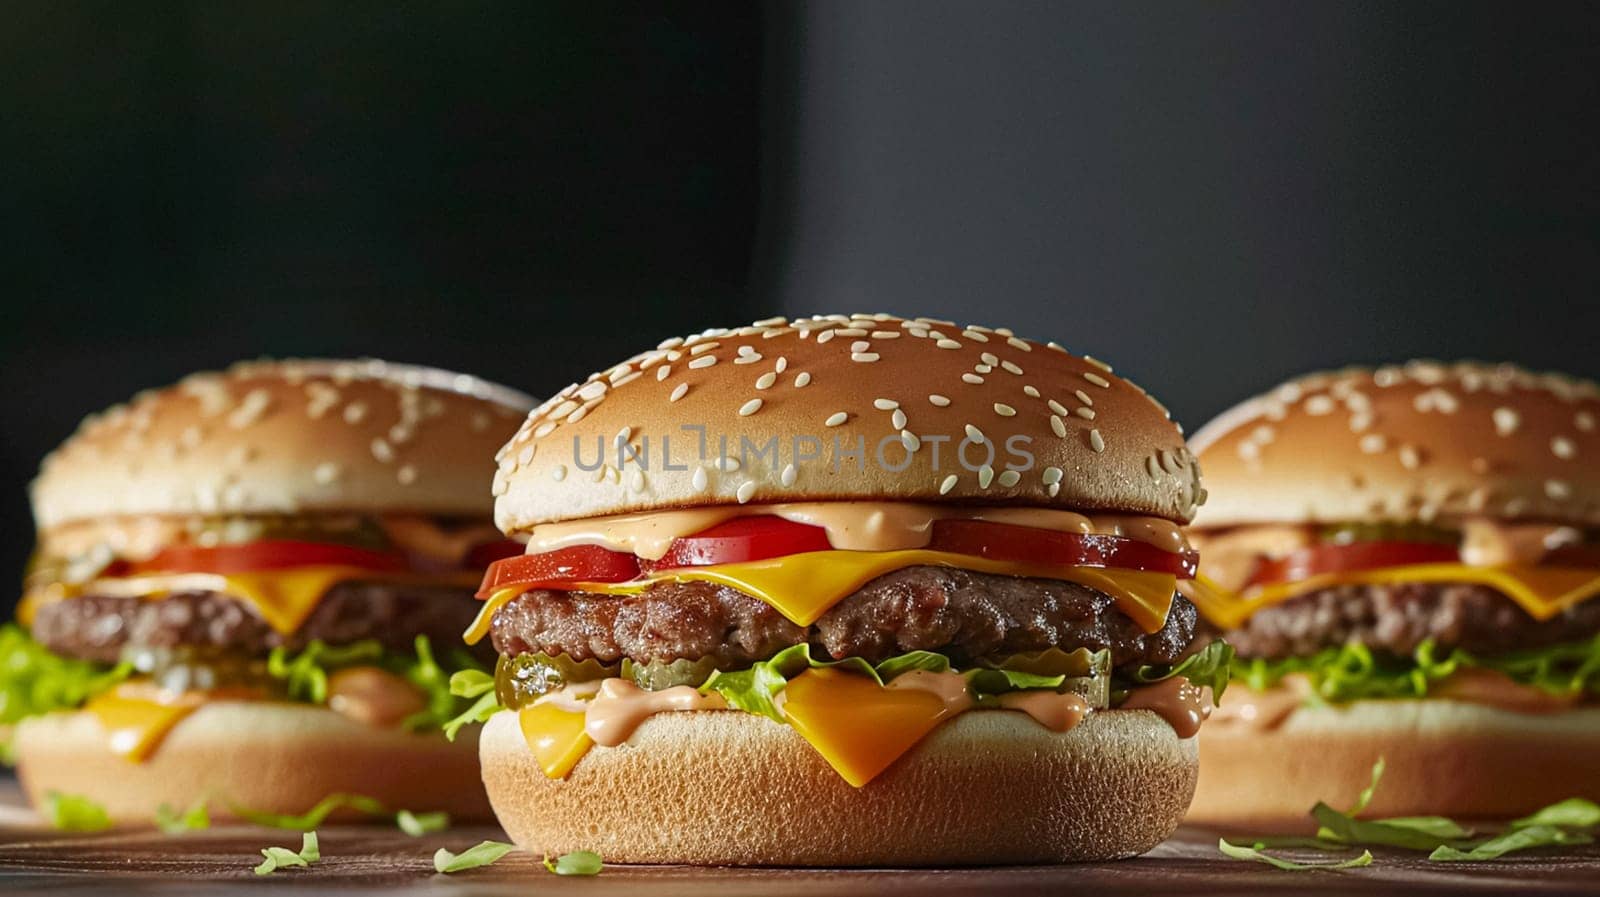 Perfect burgers, fast food chain commercial by Anneleven